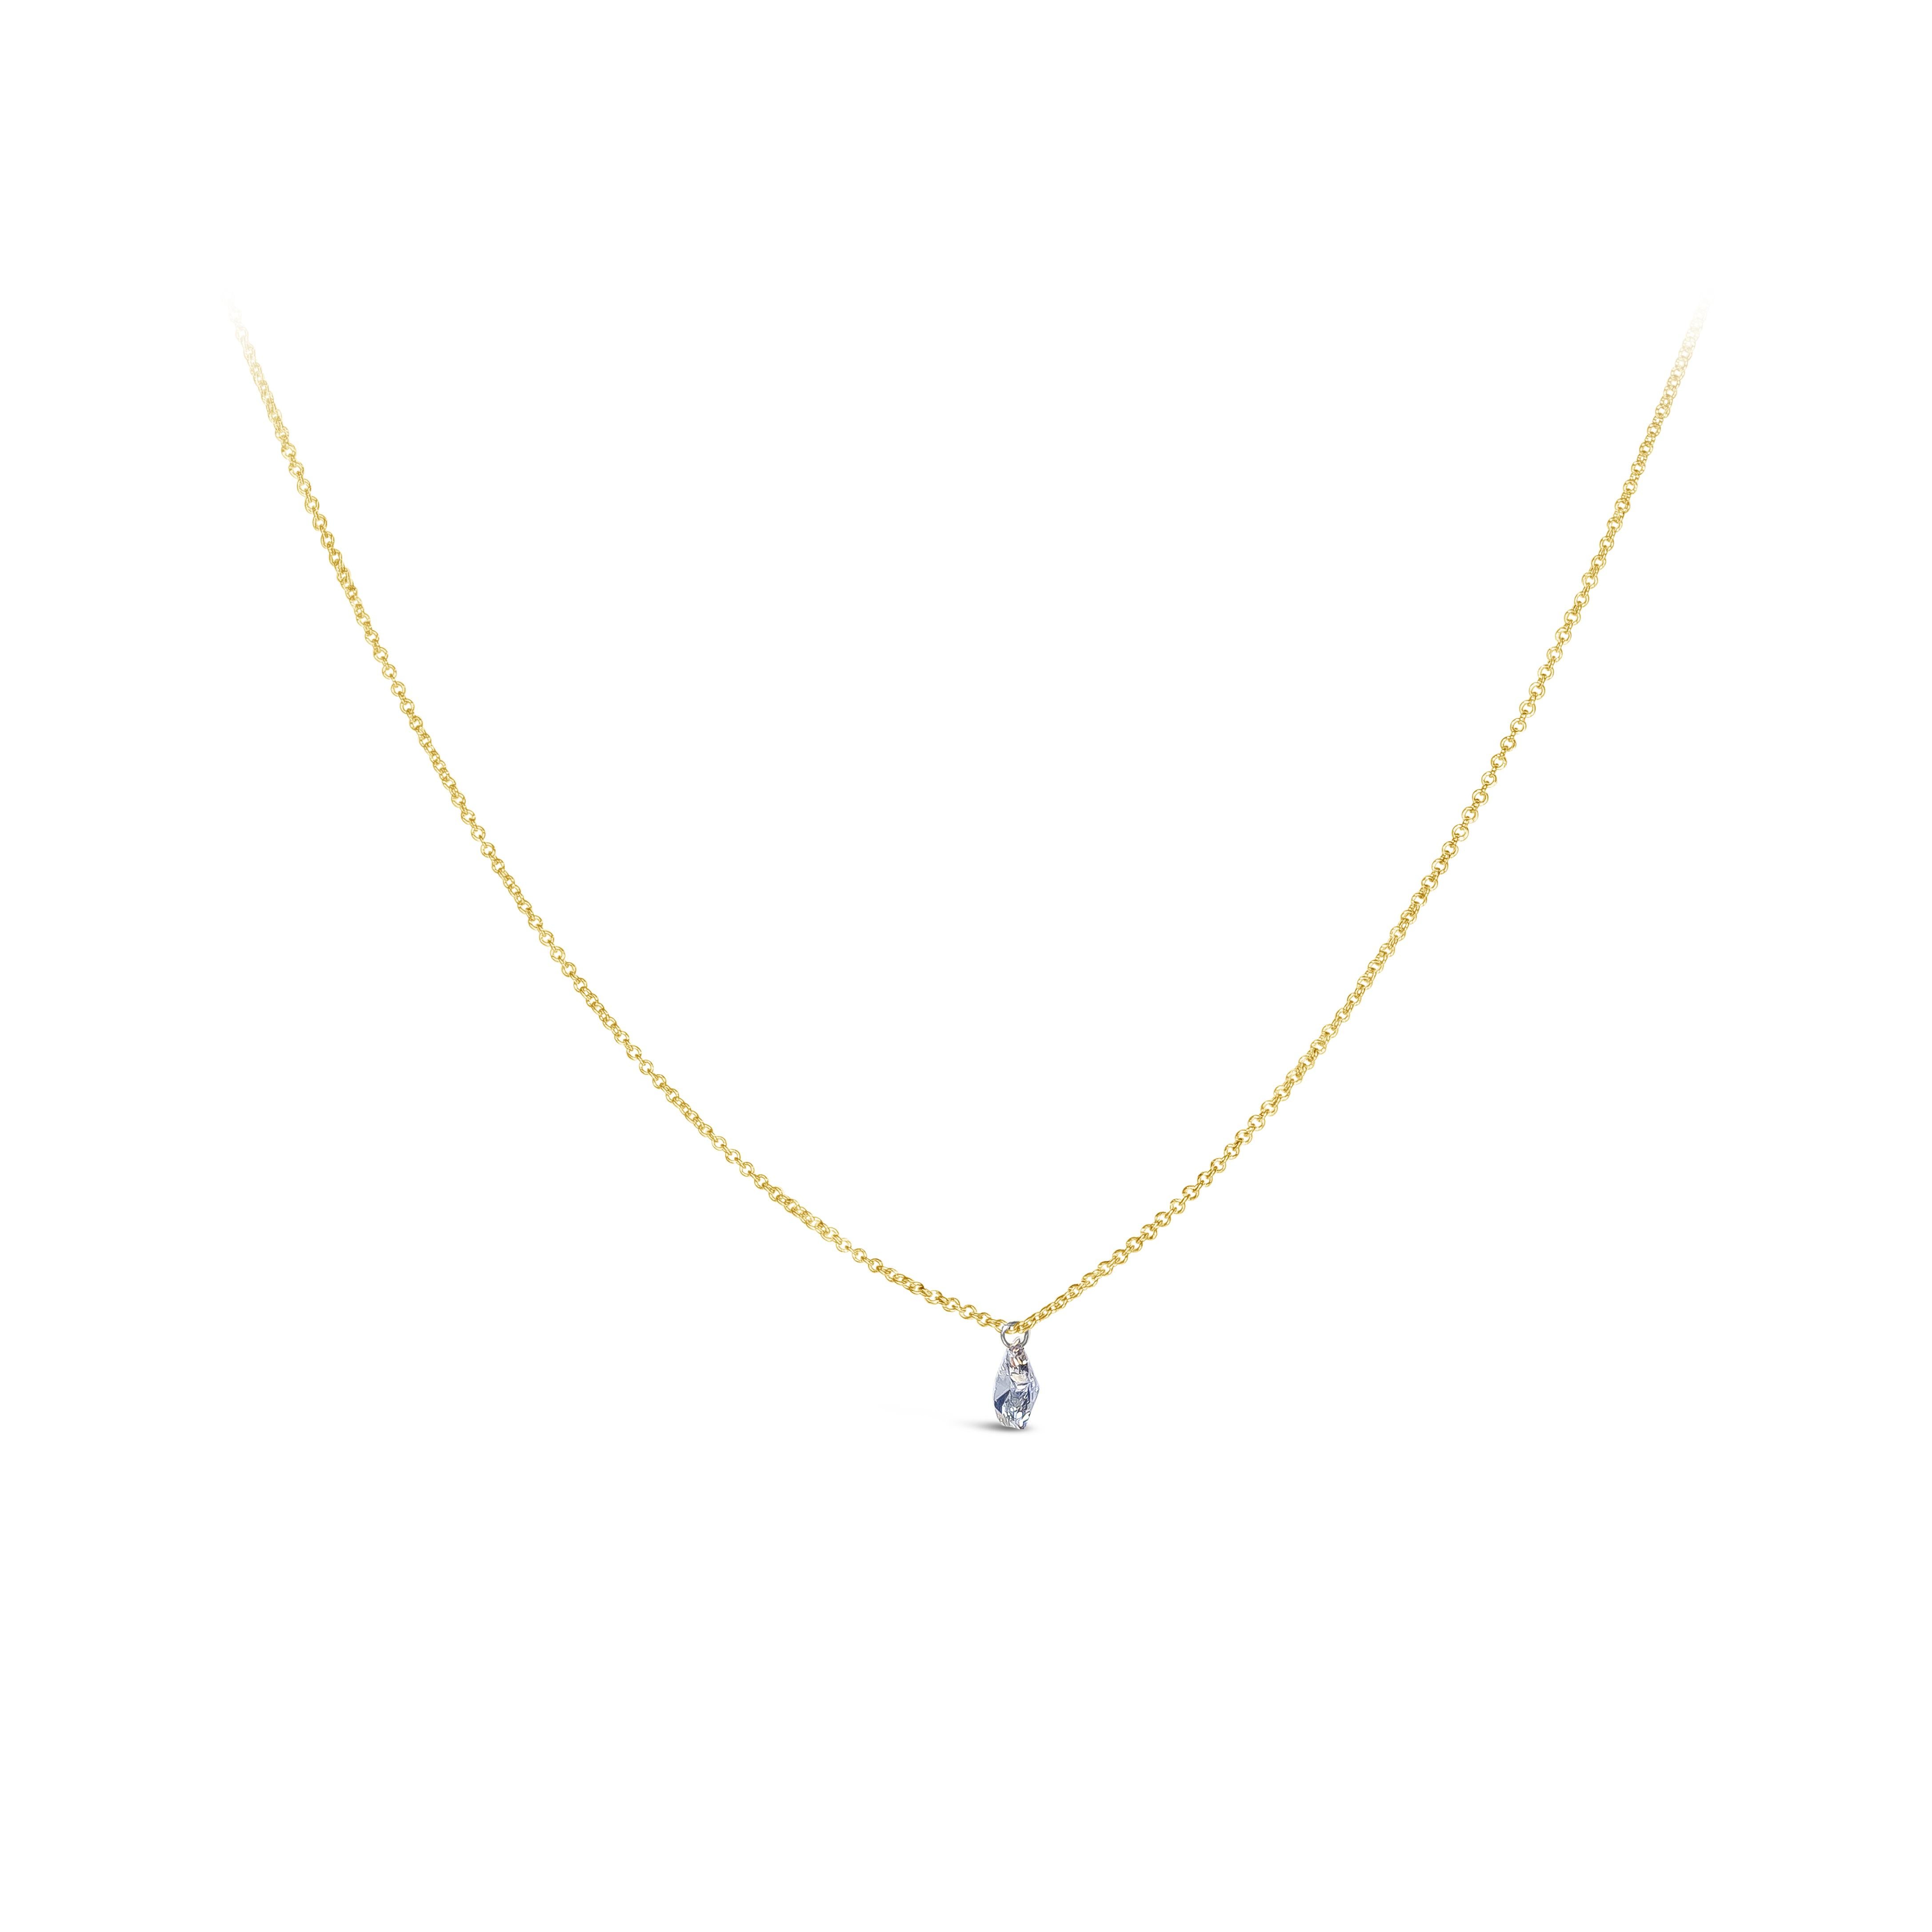 A simple and unique solitaire pendant necklace, showcasing a 0.54 carat seven-sided pear shape diamond with K color and SI clarity. Attached and drilled with an adjustable 18 inches 18K yellow gold chain.

Roman Malakov is a custom house,